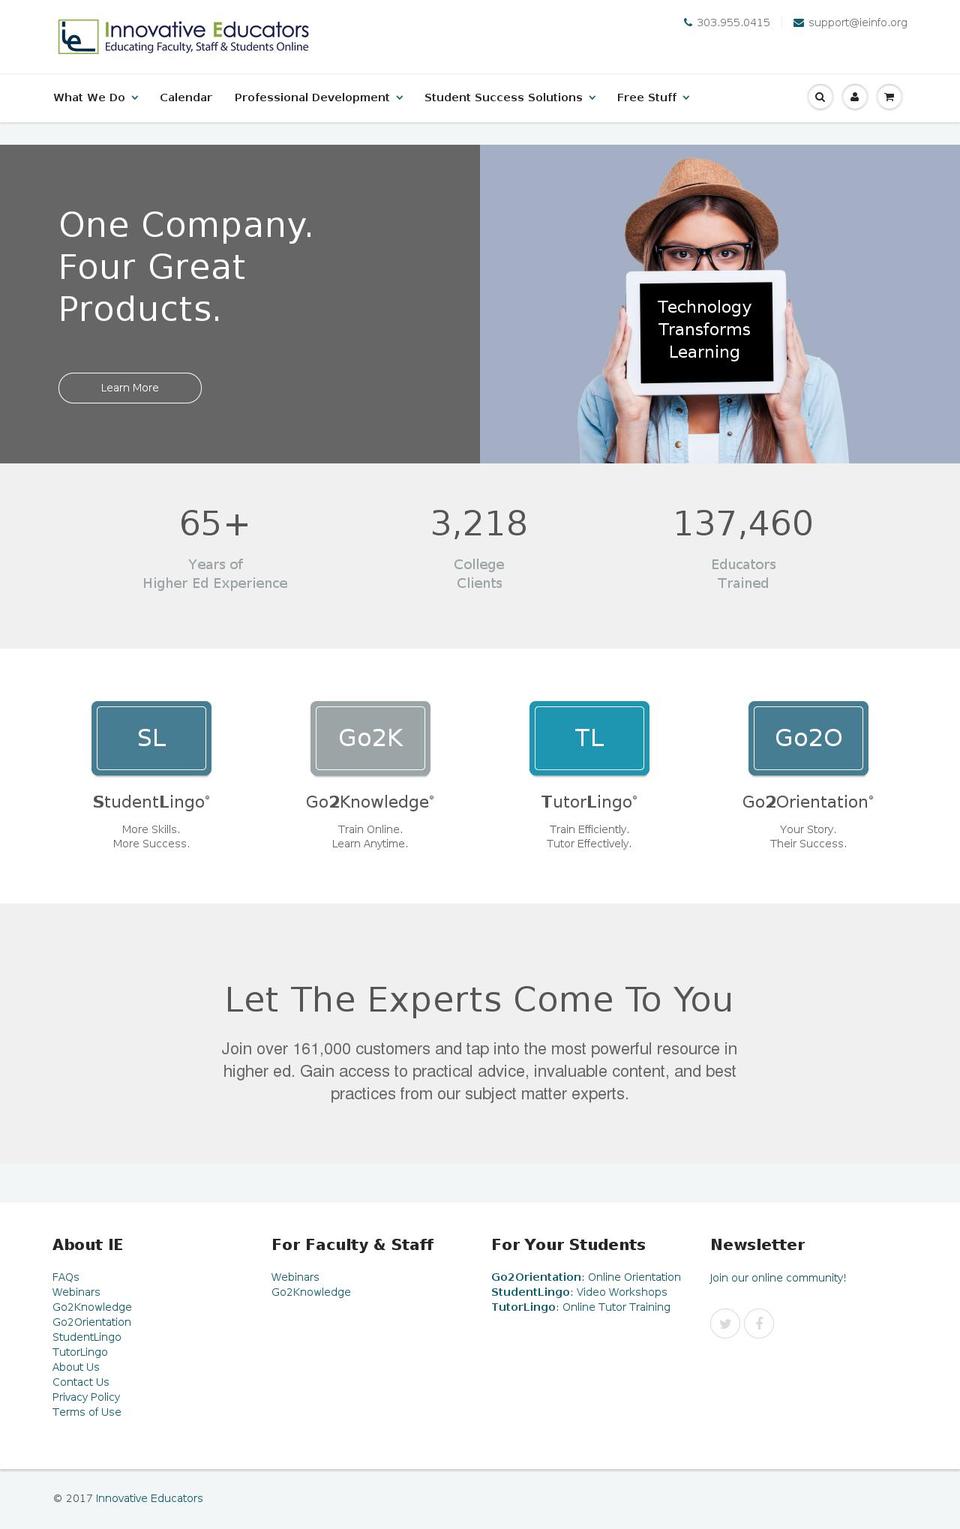 Production Shopify theme site example innovativeeducators.org